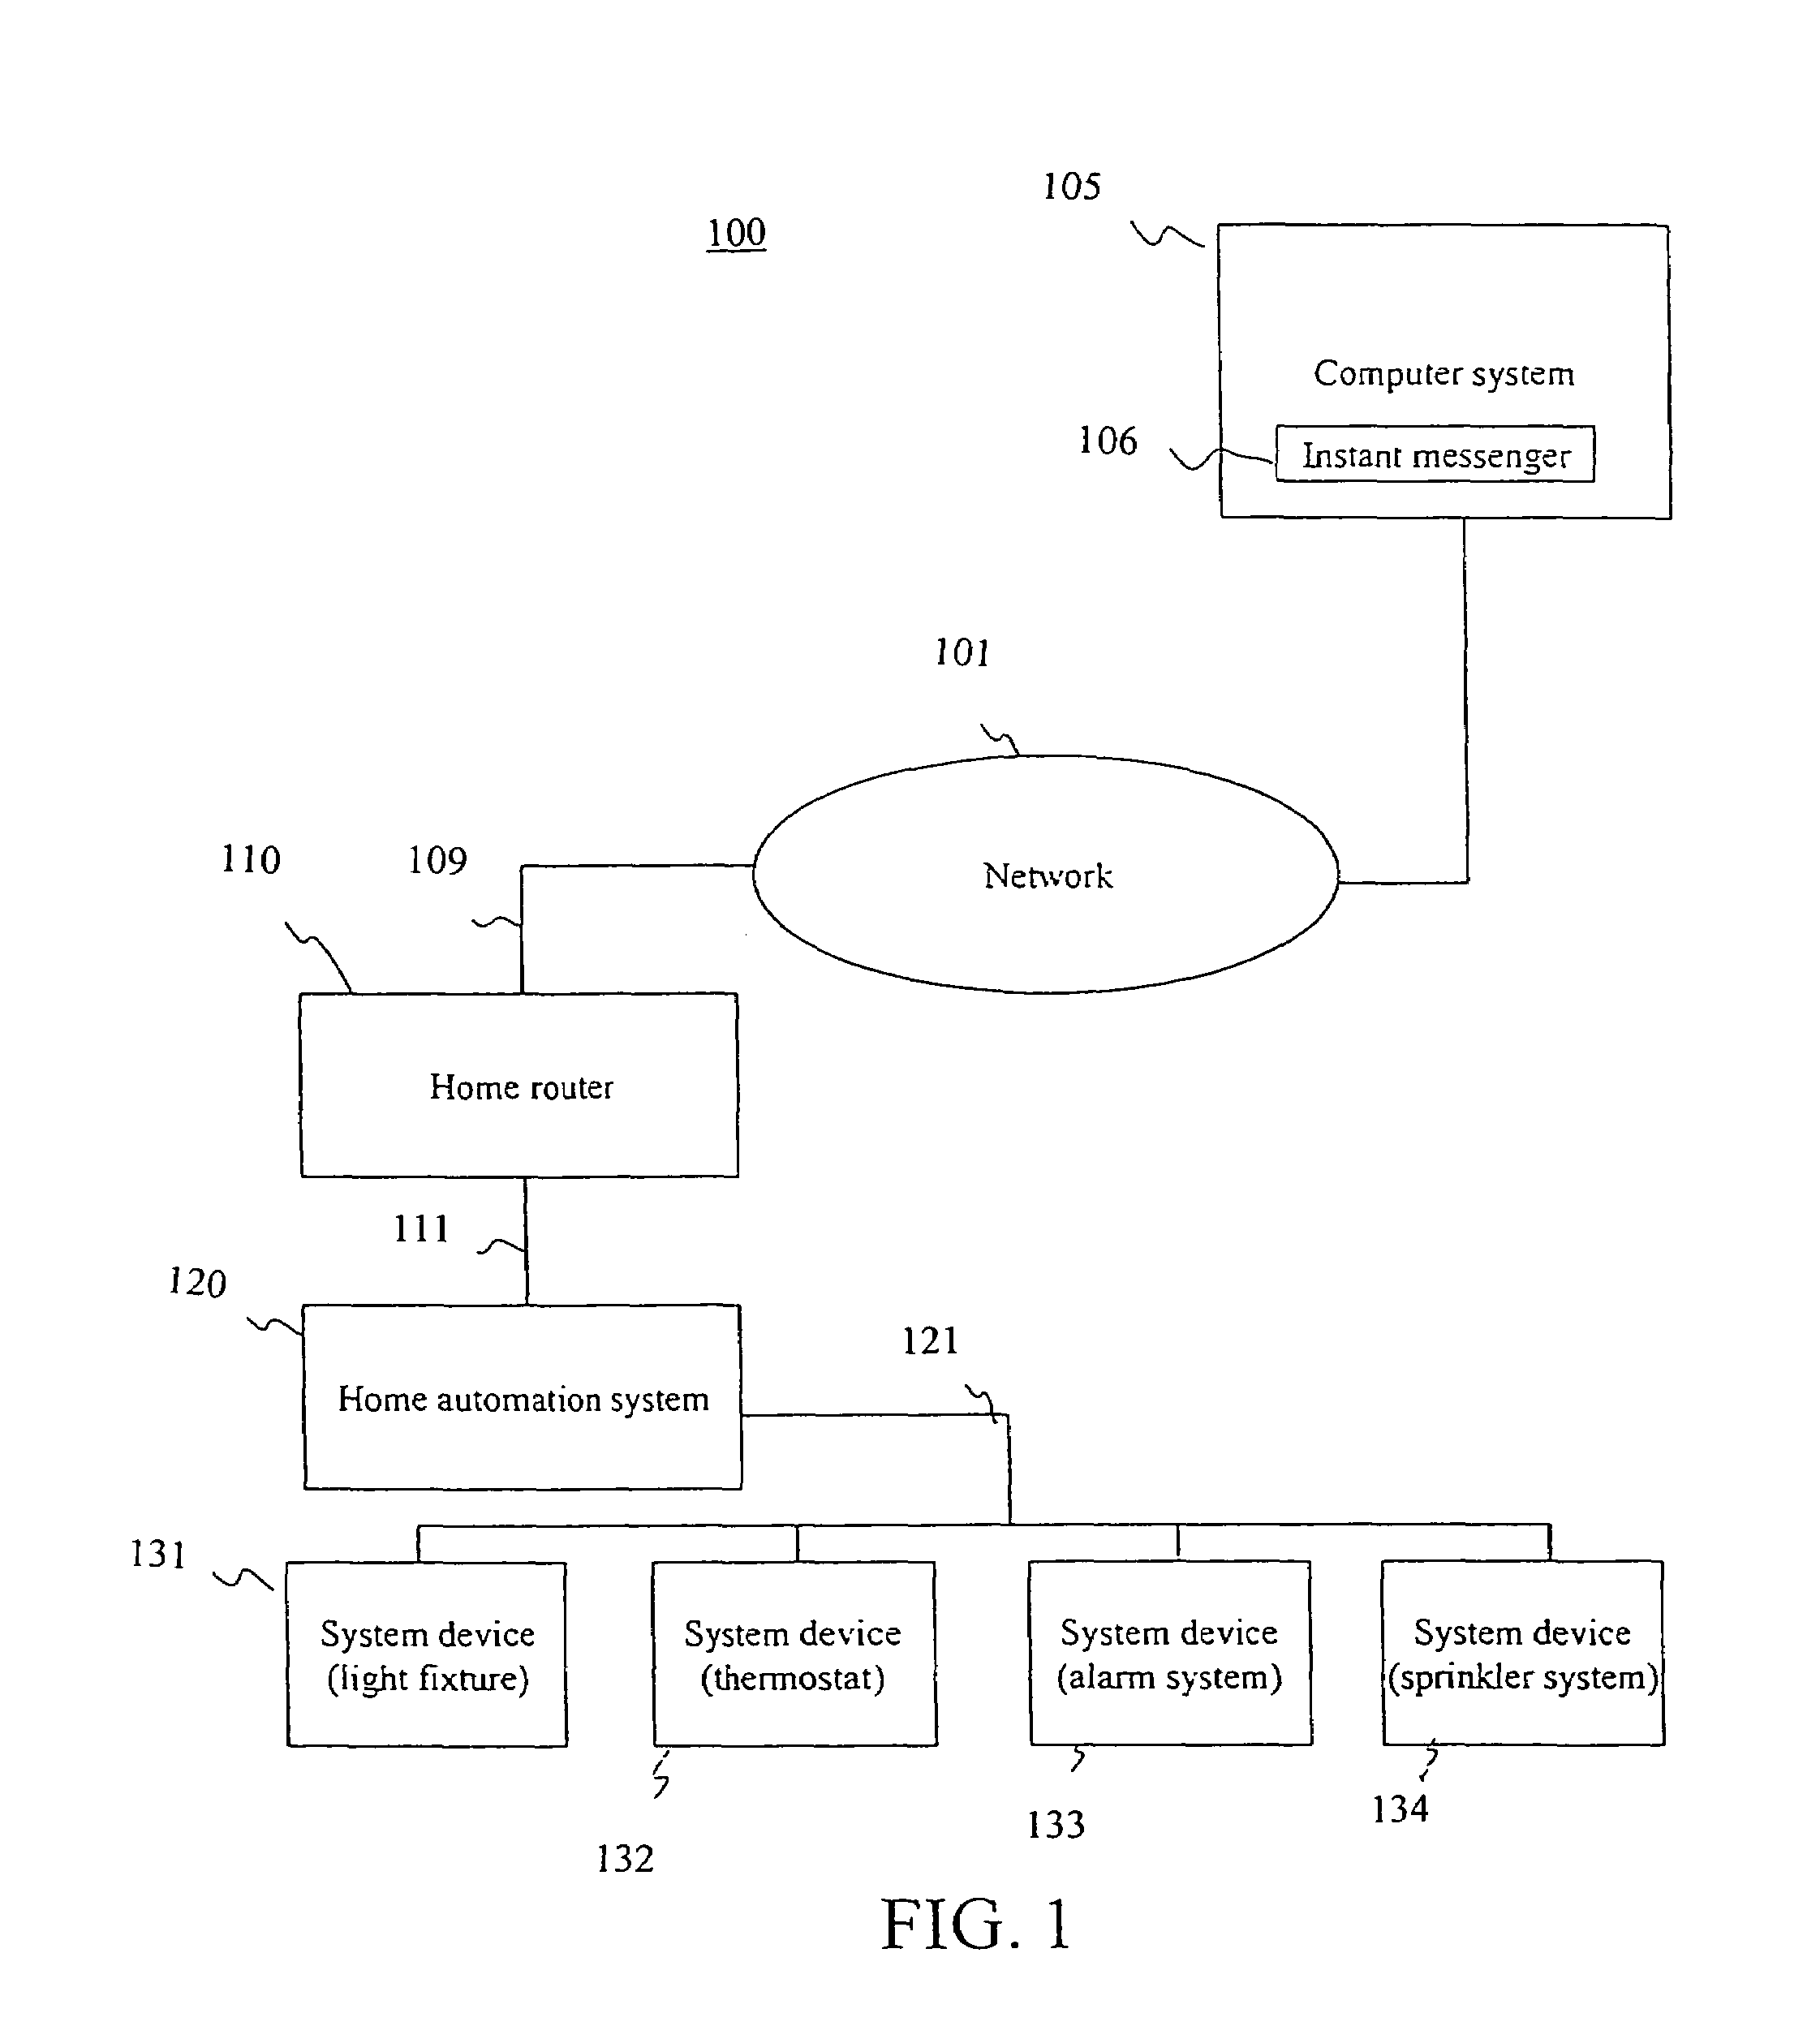 Method and system for an instant messenger home automation system interface using a home router